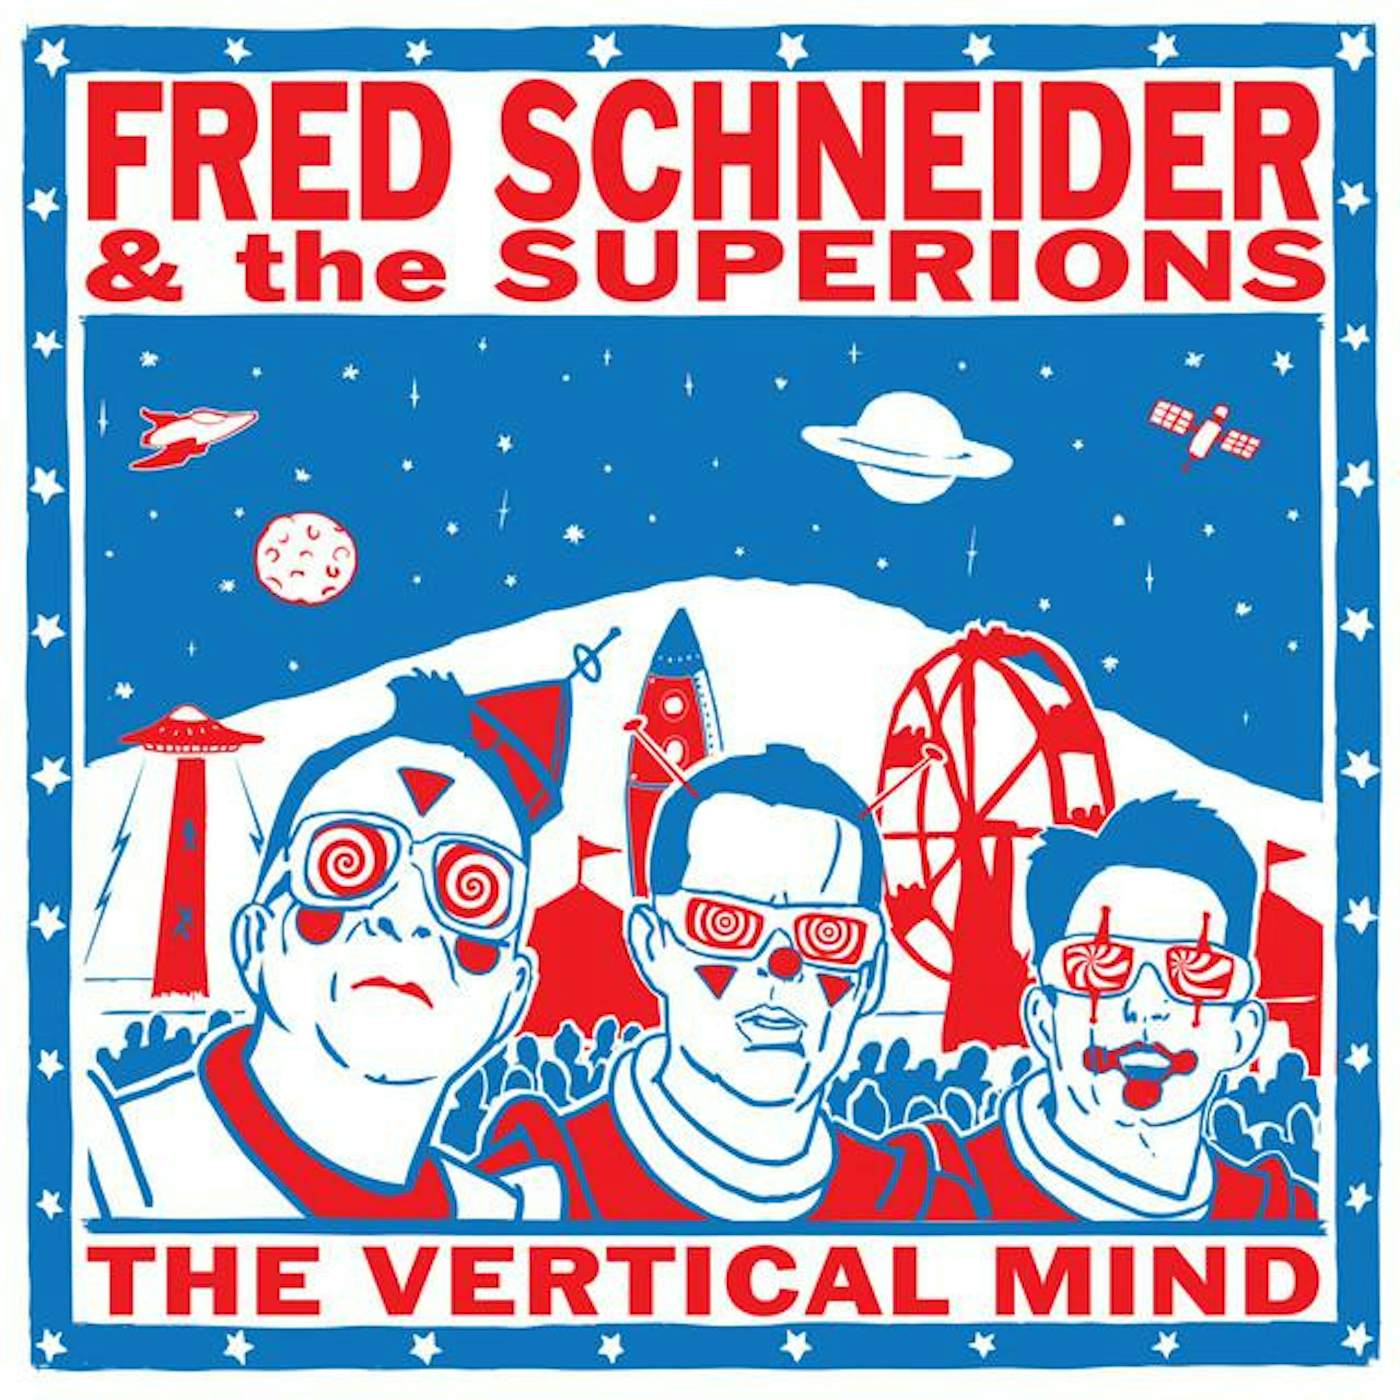 Fred Schneider & the Superions